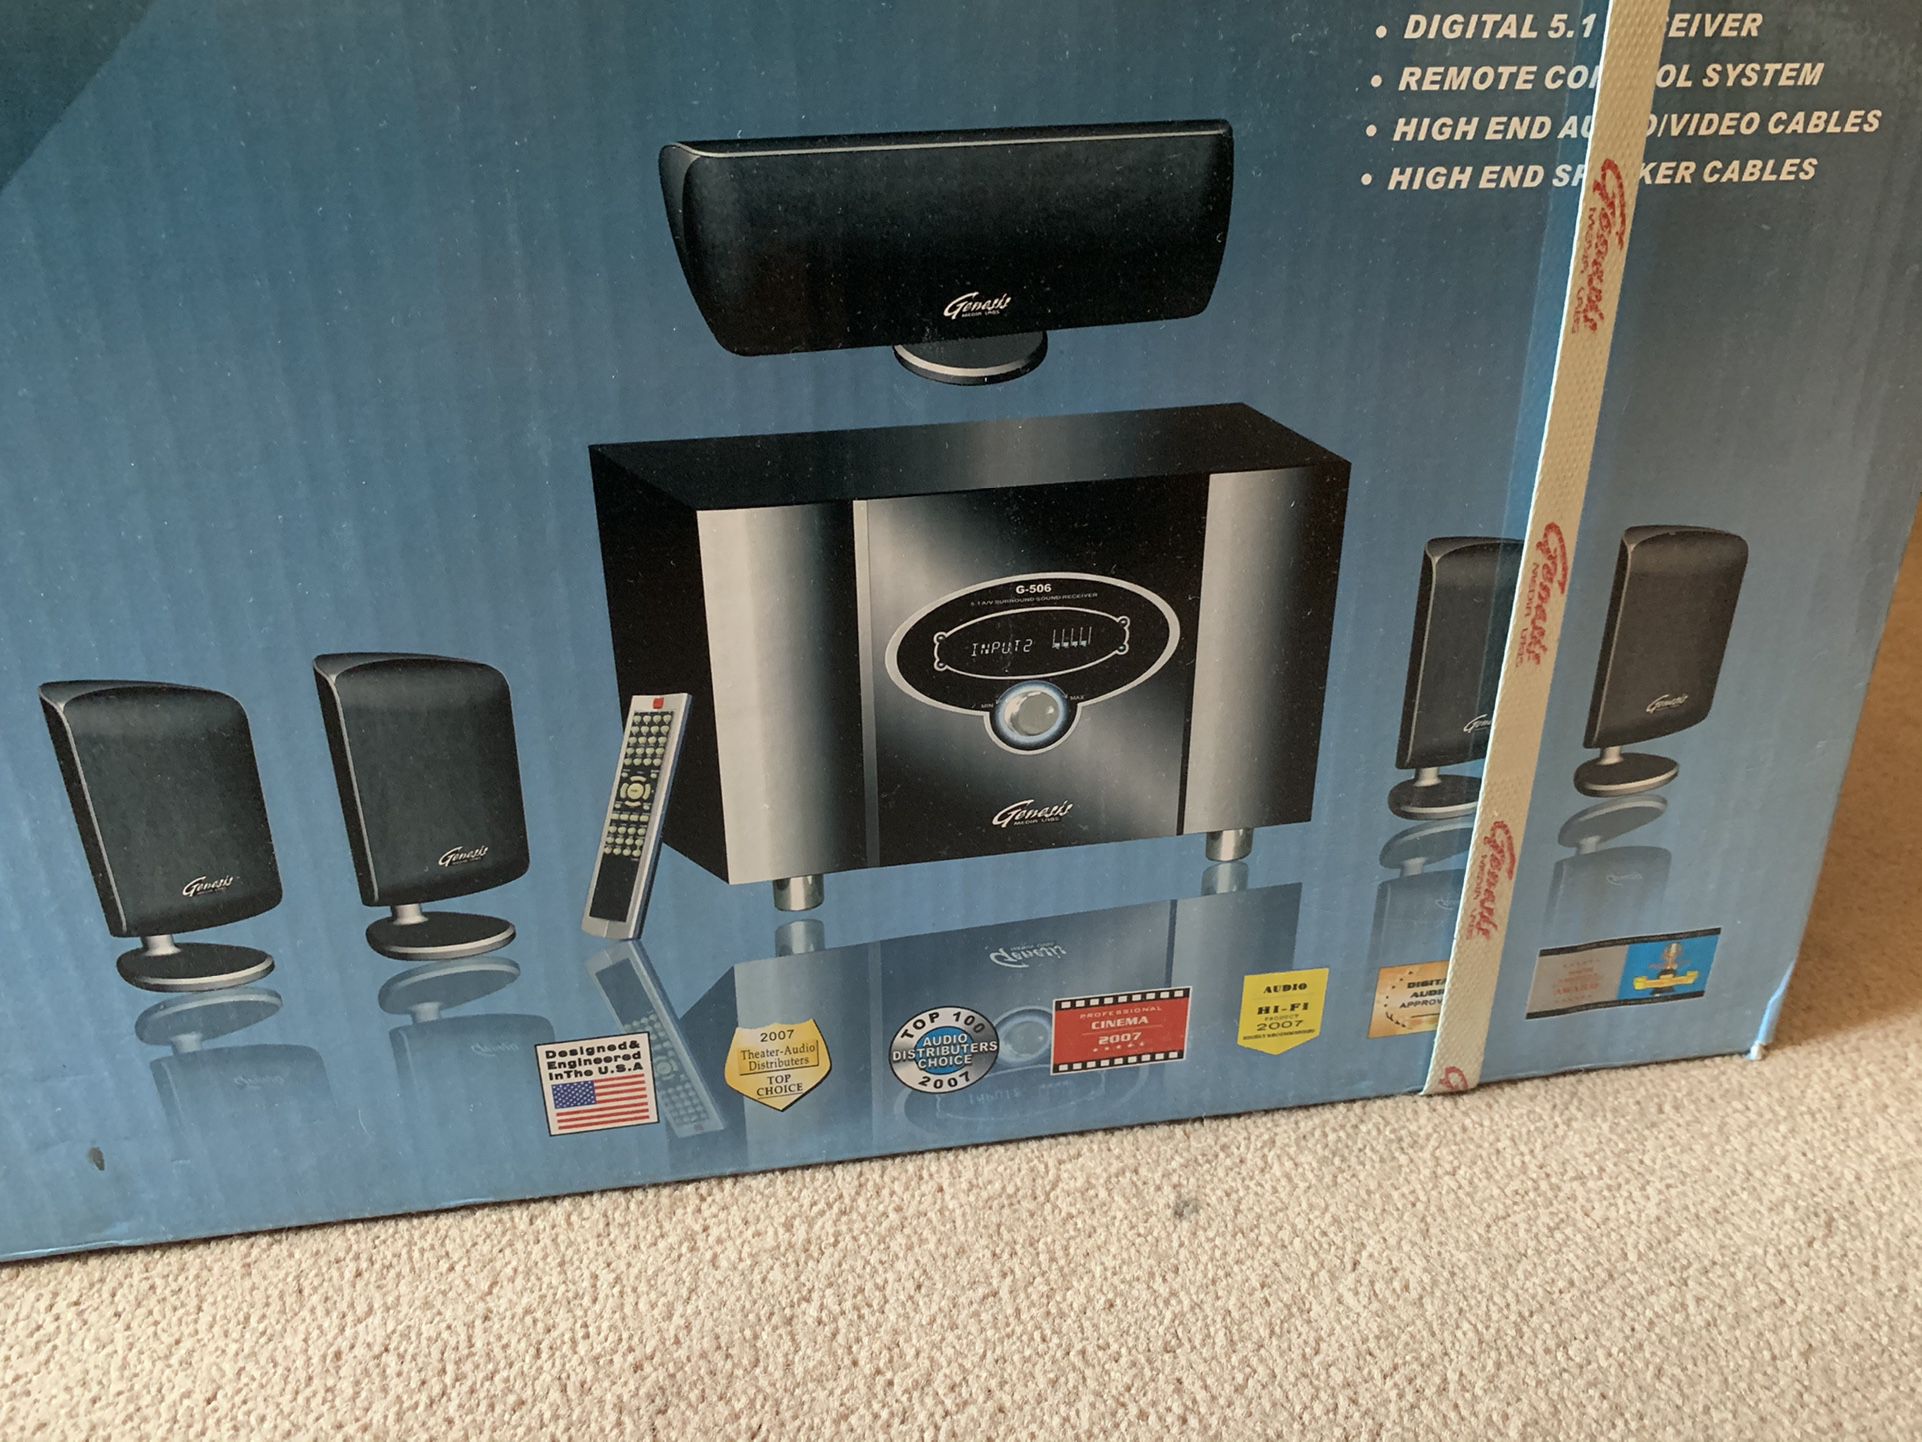 NEW Genesis Media Labs G506 home Theater audio system